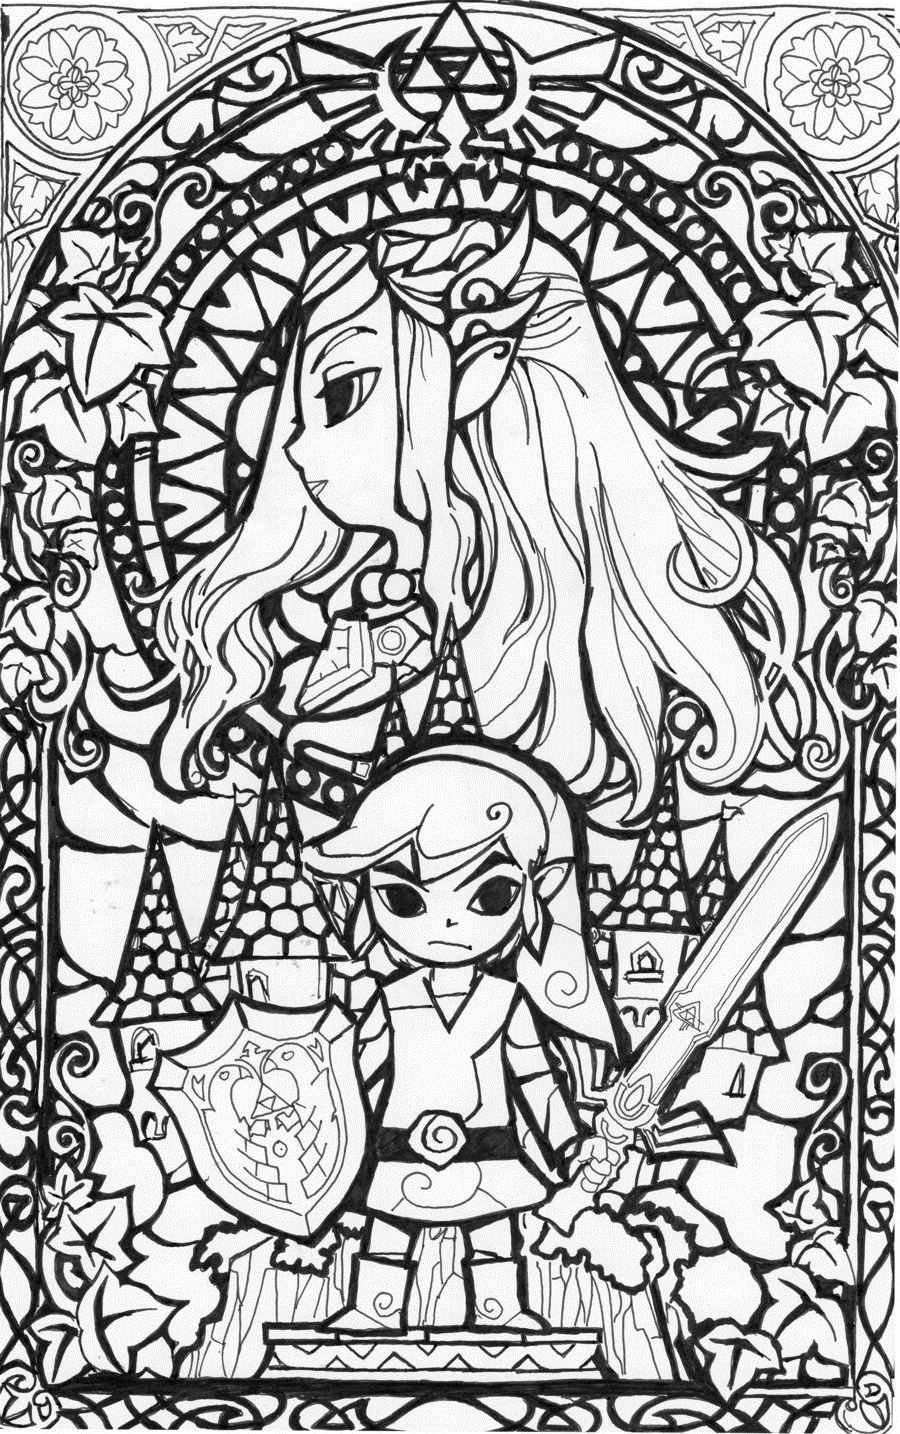 Legend Of Zelda Cool Coloring Pages Coloring Pages Free Coloring Pages